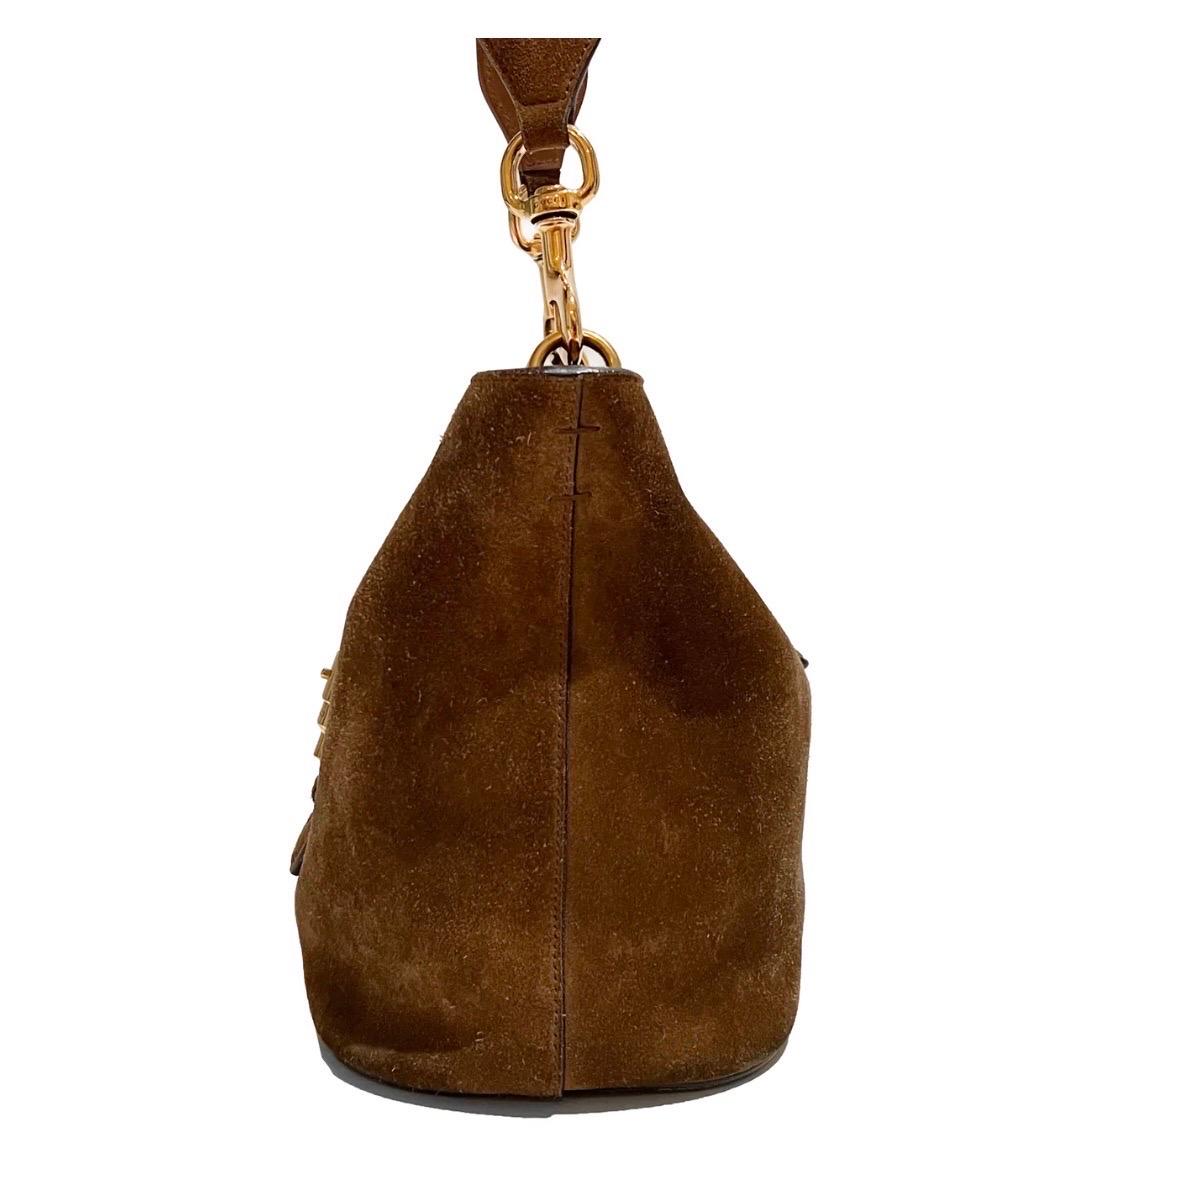 Product Details:
Brown Suede Jackie Bucket Bag by Gucci
Spring / Summer 2015
Made in Italy
Soft brown suede
Bucket style Jackie bag
Fold over strap with button clasp closure
Includes dual interchangeable shoulder straps
Cross body signature